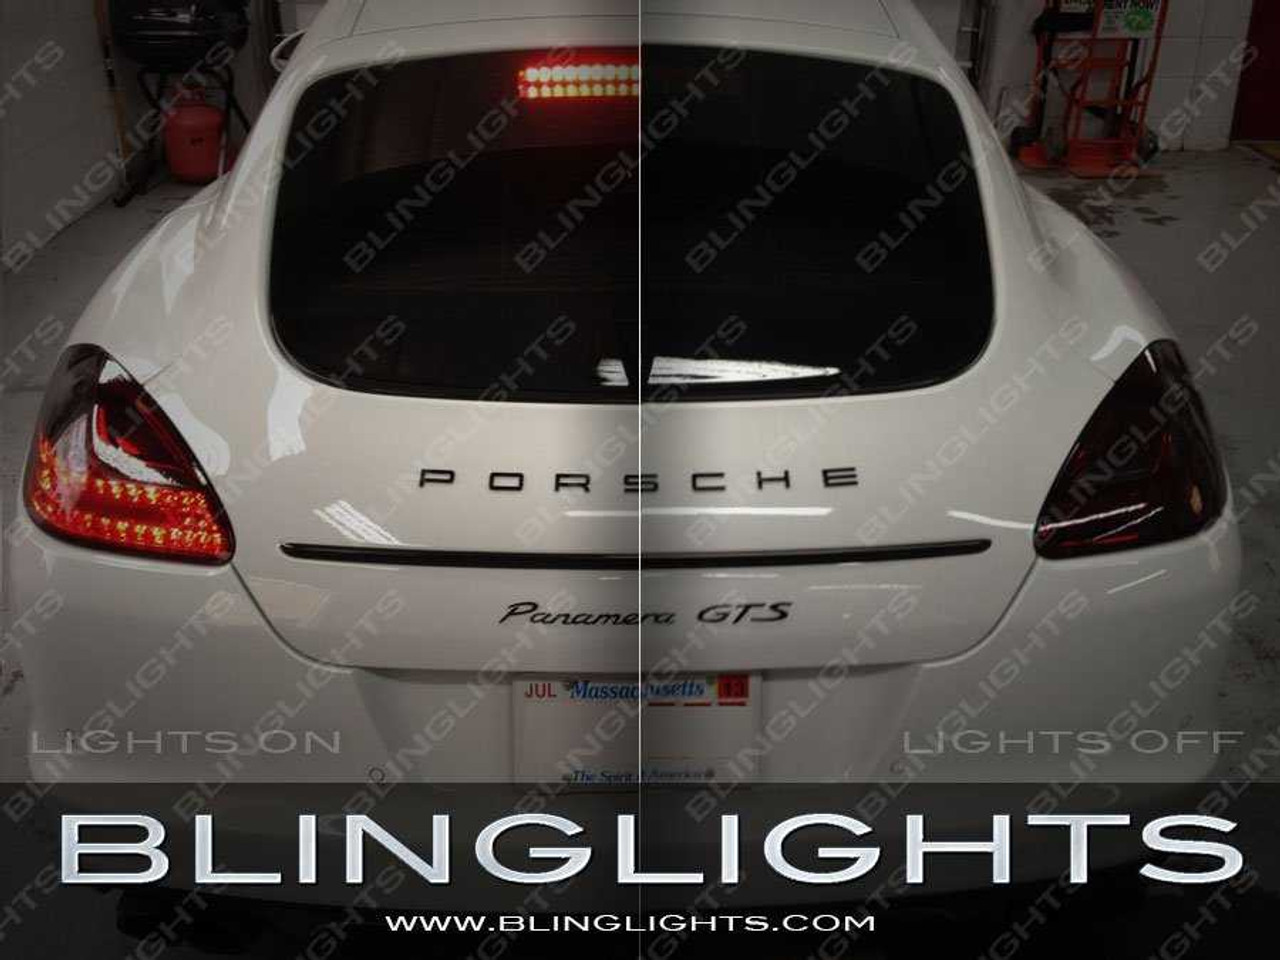 BlingLights Brand Tinted Taillight Film Covers for 2023 2024 2025 Subaru Ascent